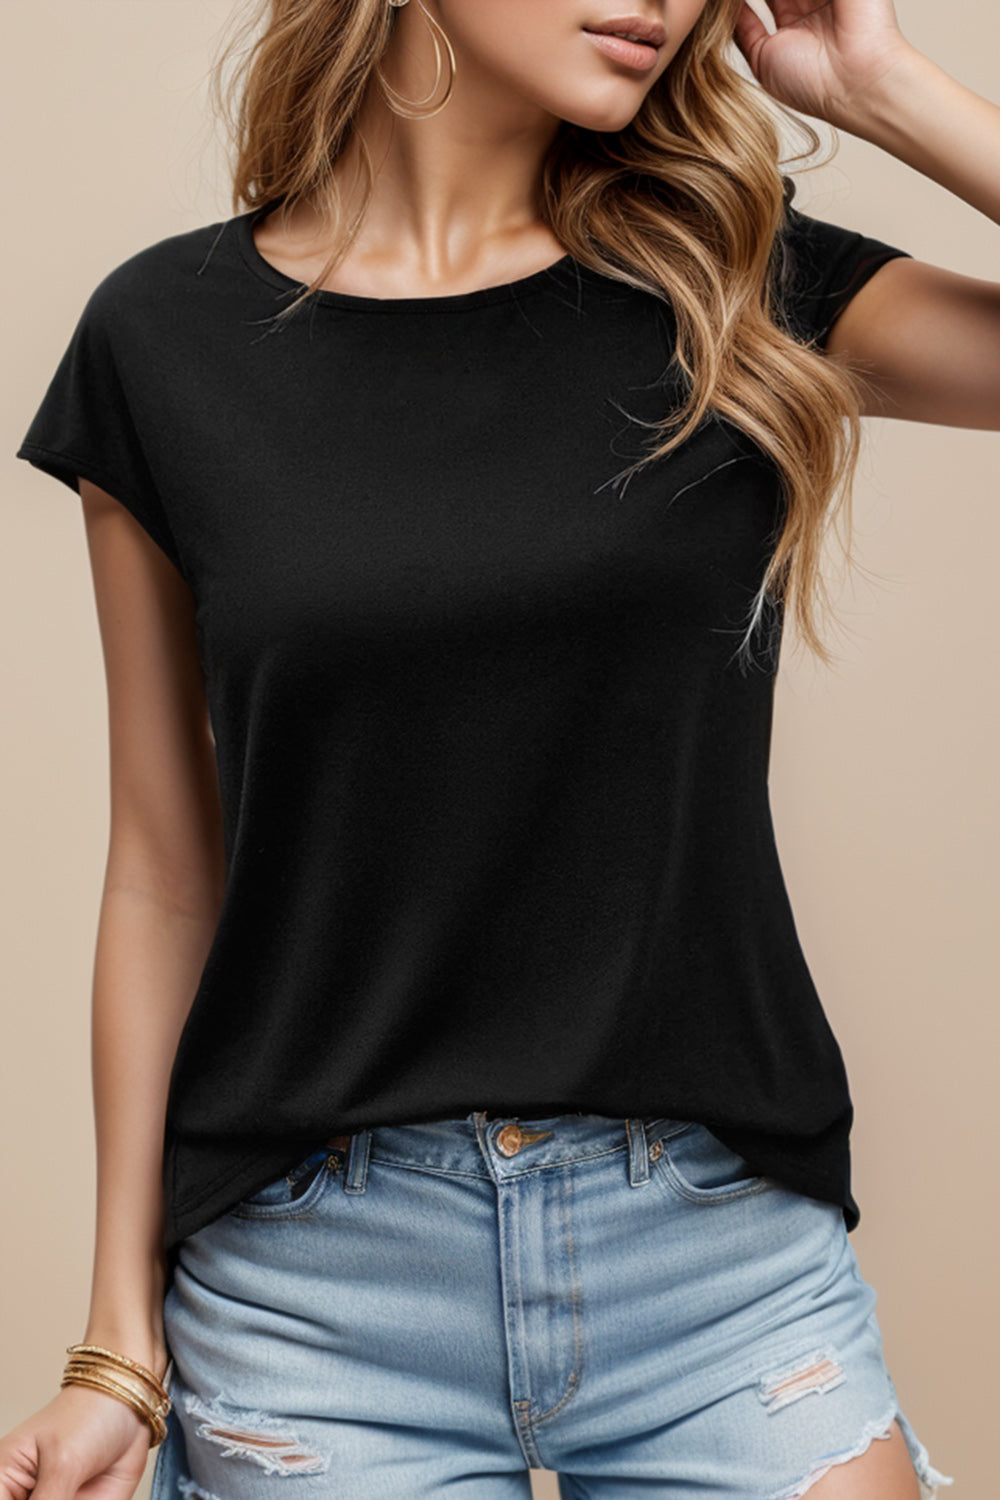 Black Blouse with split back and pearl detail